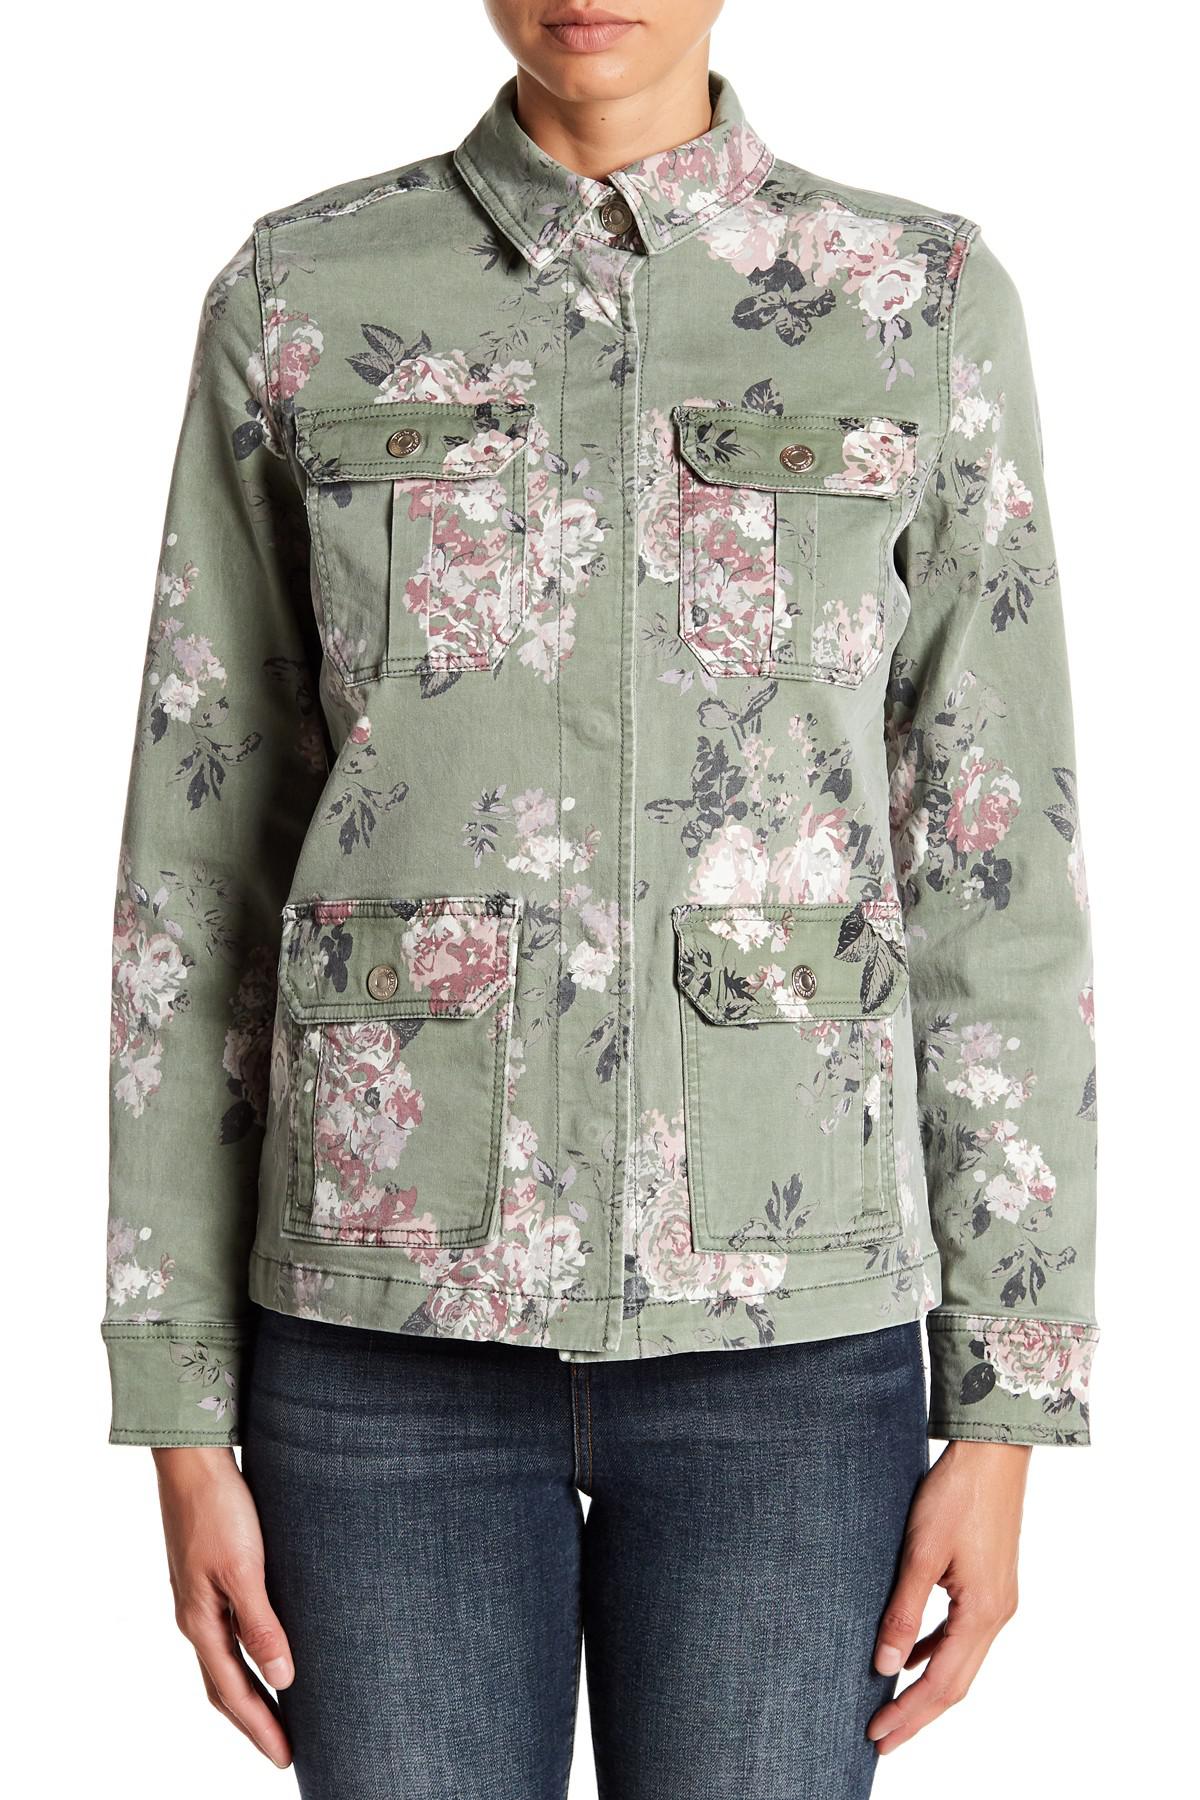 Kensie Cotton Patterned Utility Jacket in Green Floral (Green) - Lyst